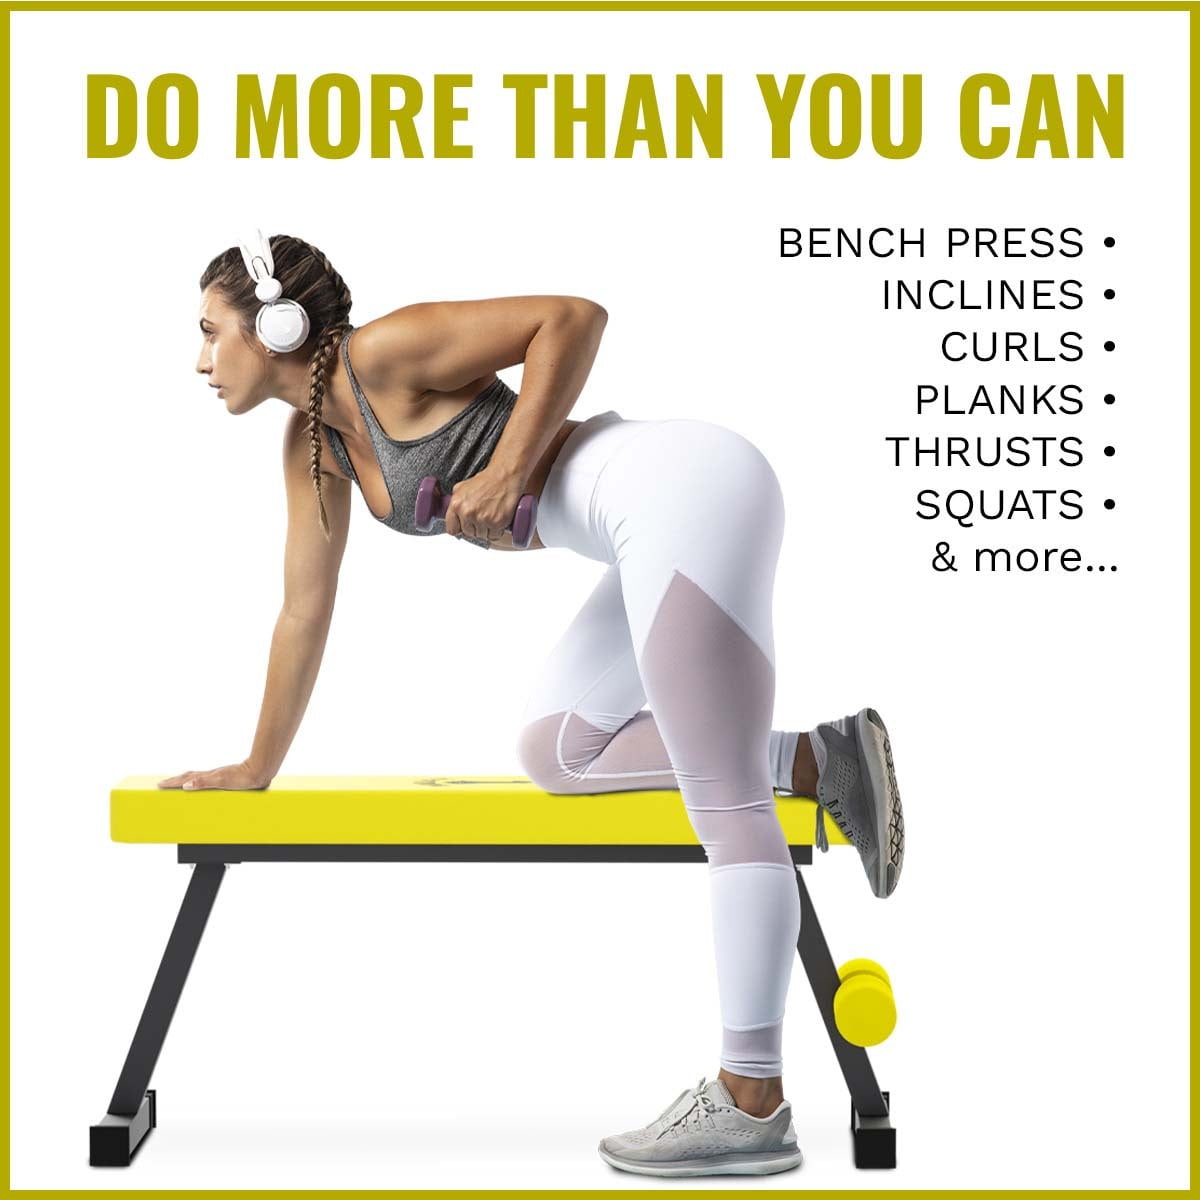 Durafit Simple Flat Bench SB01 used for Multiple workouts